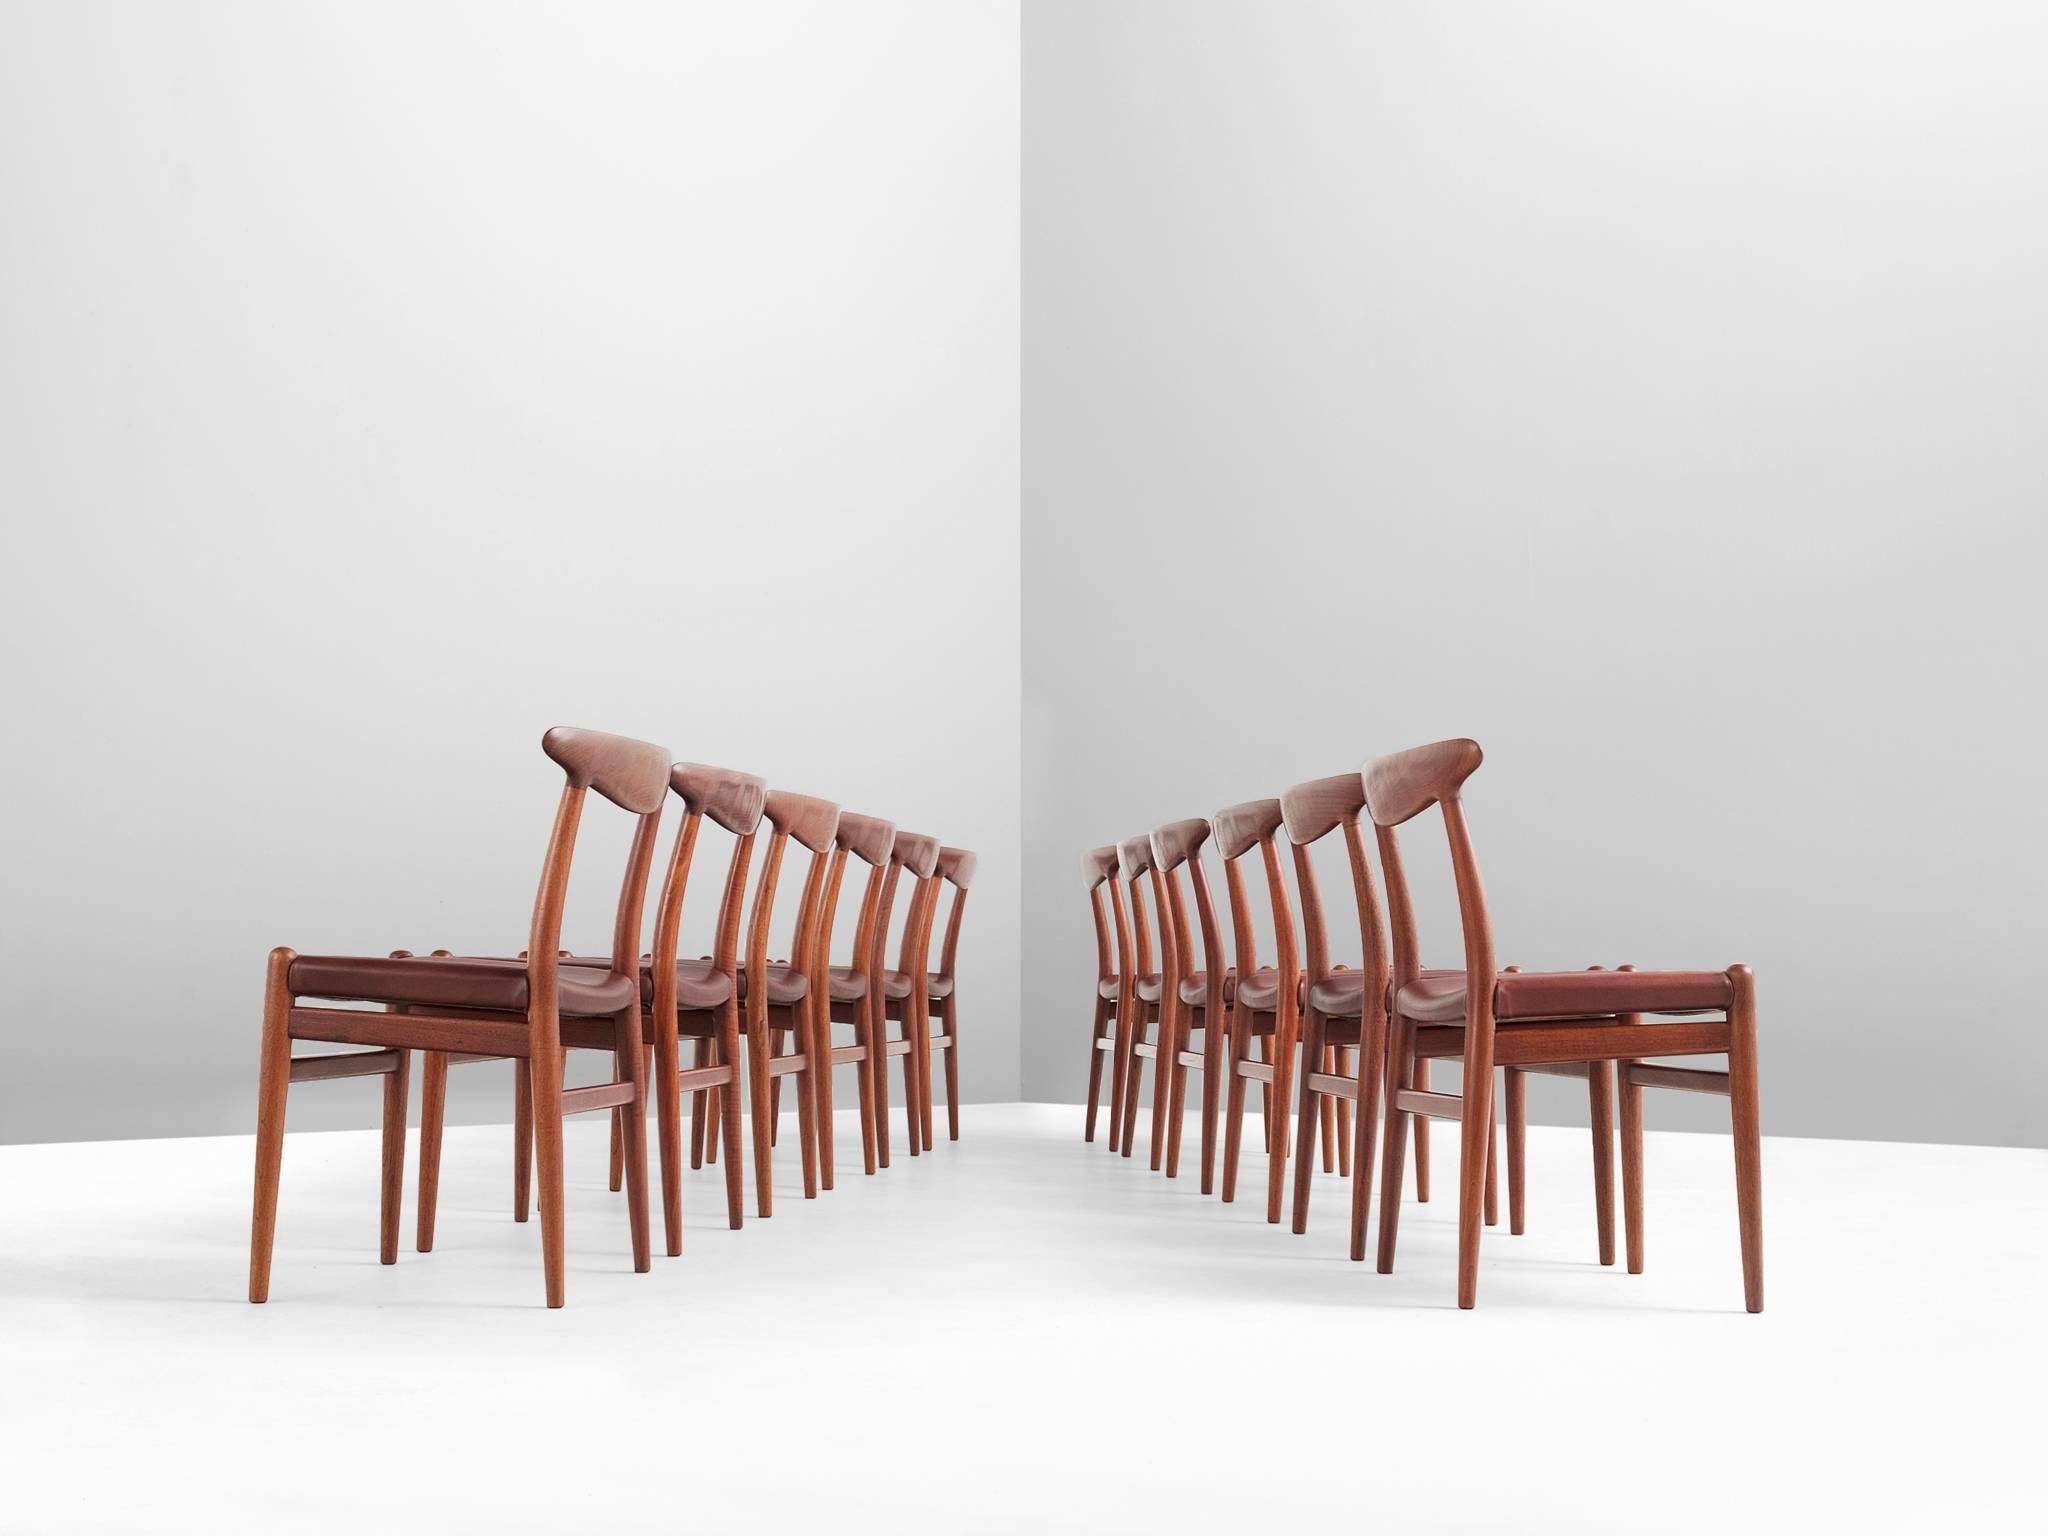 Set of 12 chairs model W2 in teak and leather by Hans J. Wegner, Denmark, 1950s.

Stunning set of 12 chairs by Danish designer Hans Wegner. Simplistic design for ergonomic and comfortable seating. All segments emphasize the open and light